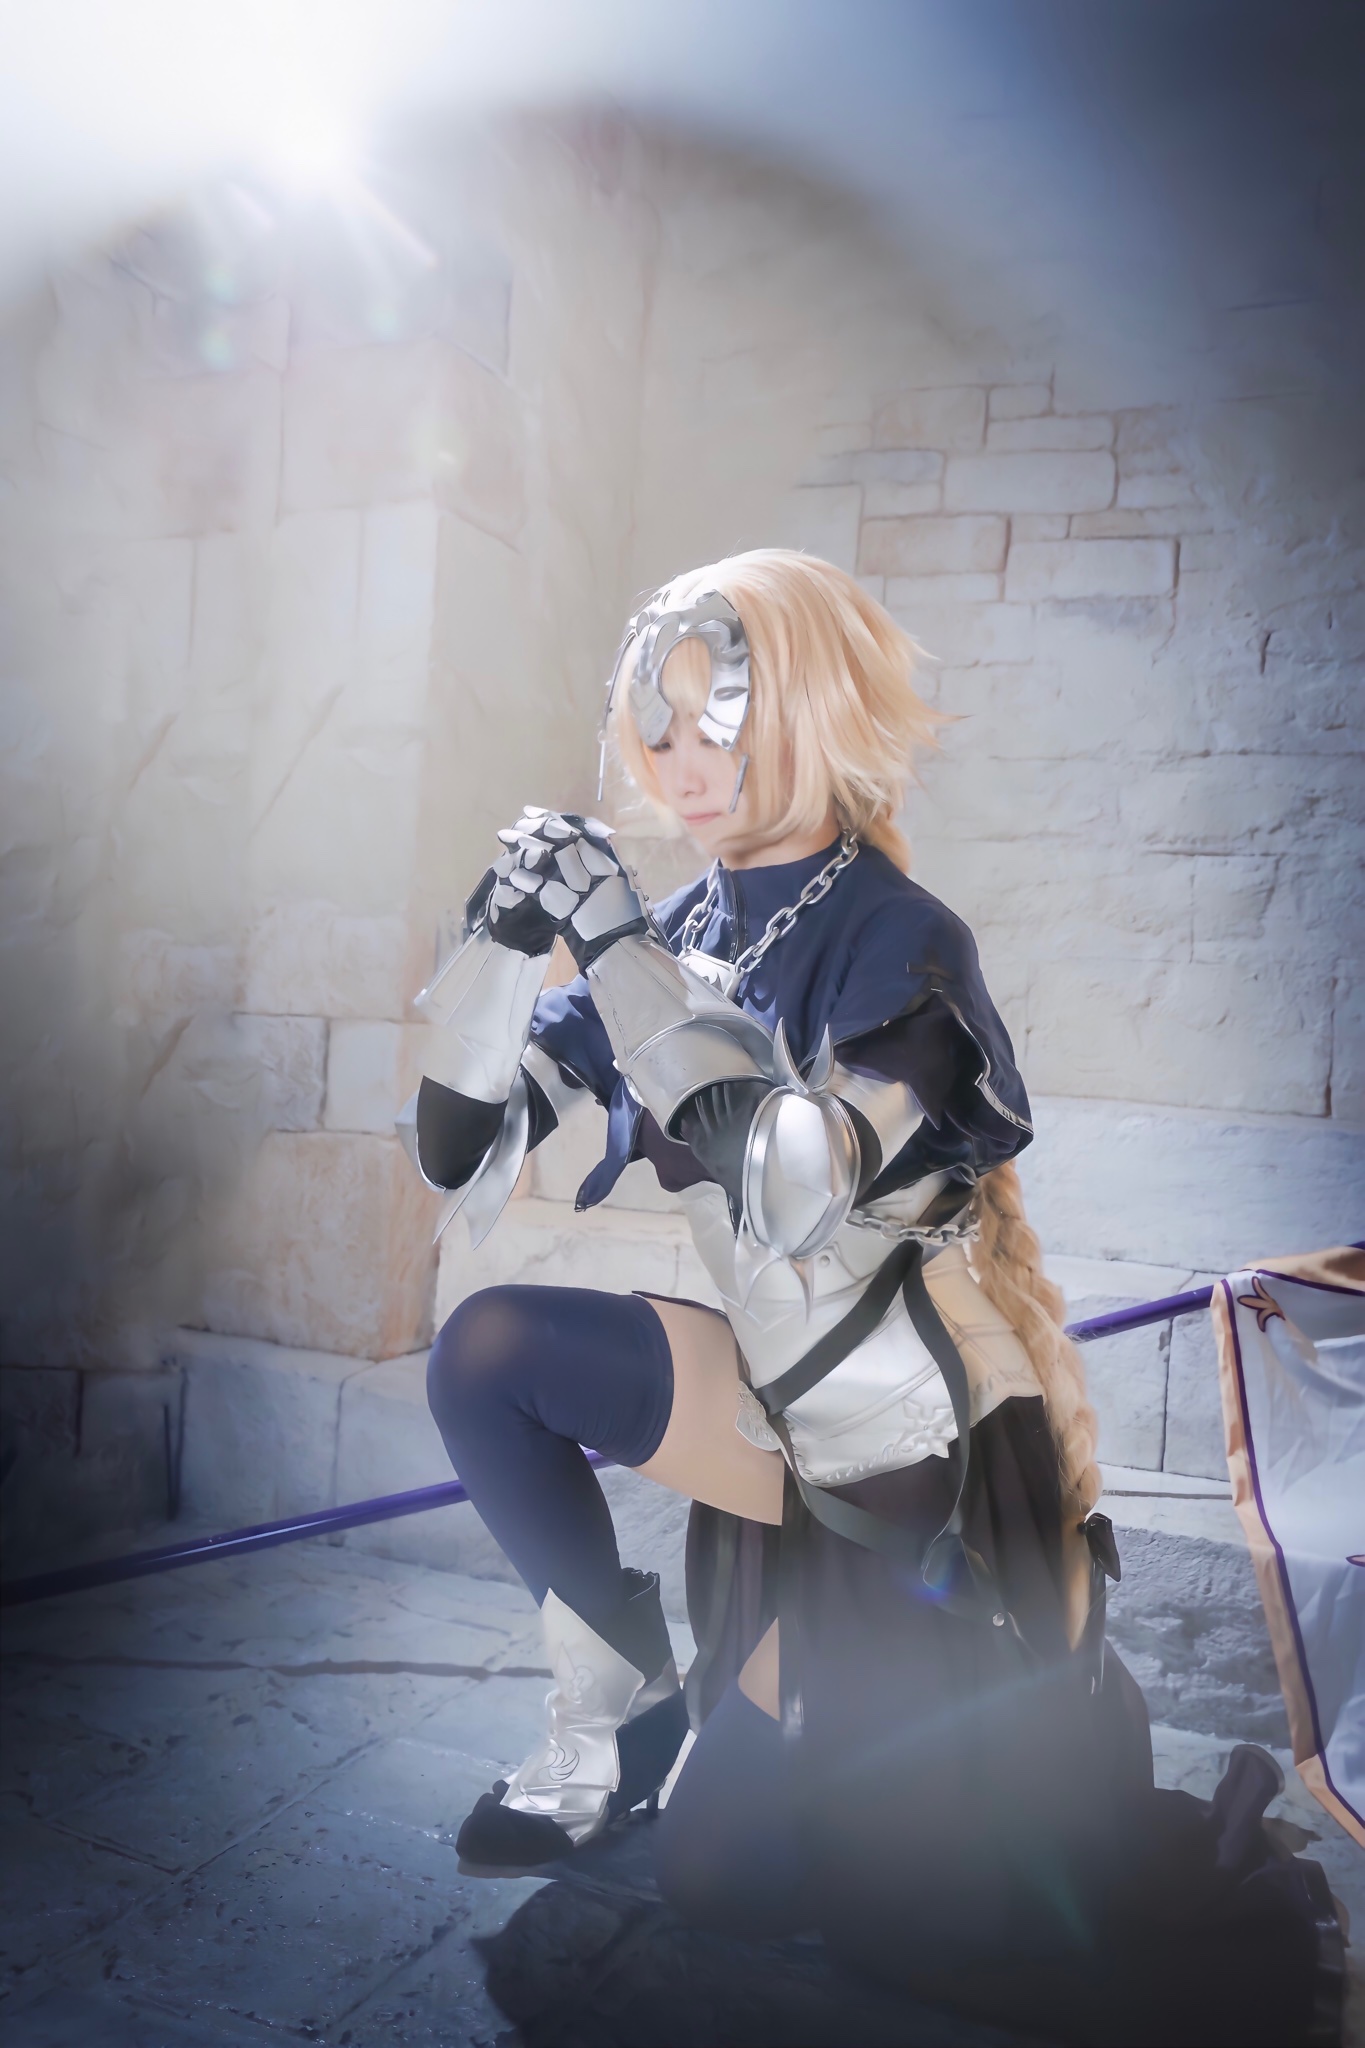 Jeanne DArc Fate Ruler Fate Apocrypha Asian Asian Cosplayer Cosplay Japanese Japanese Women Women Lo 1365x2048